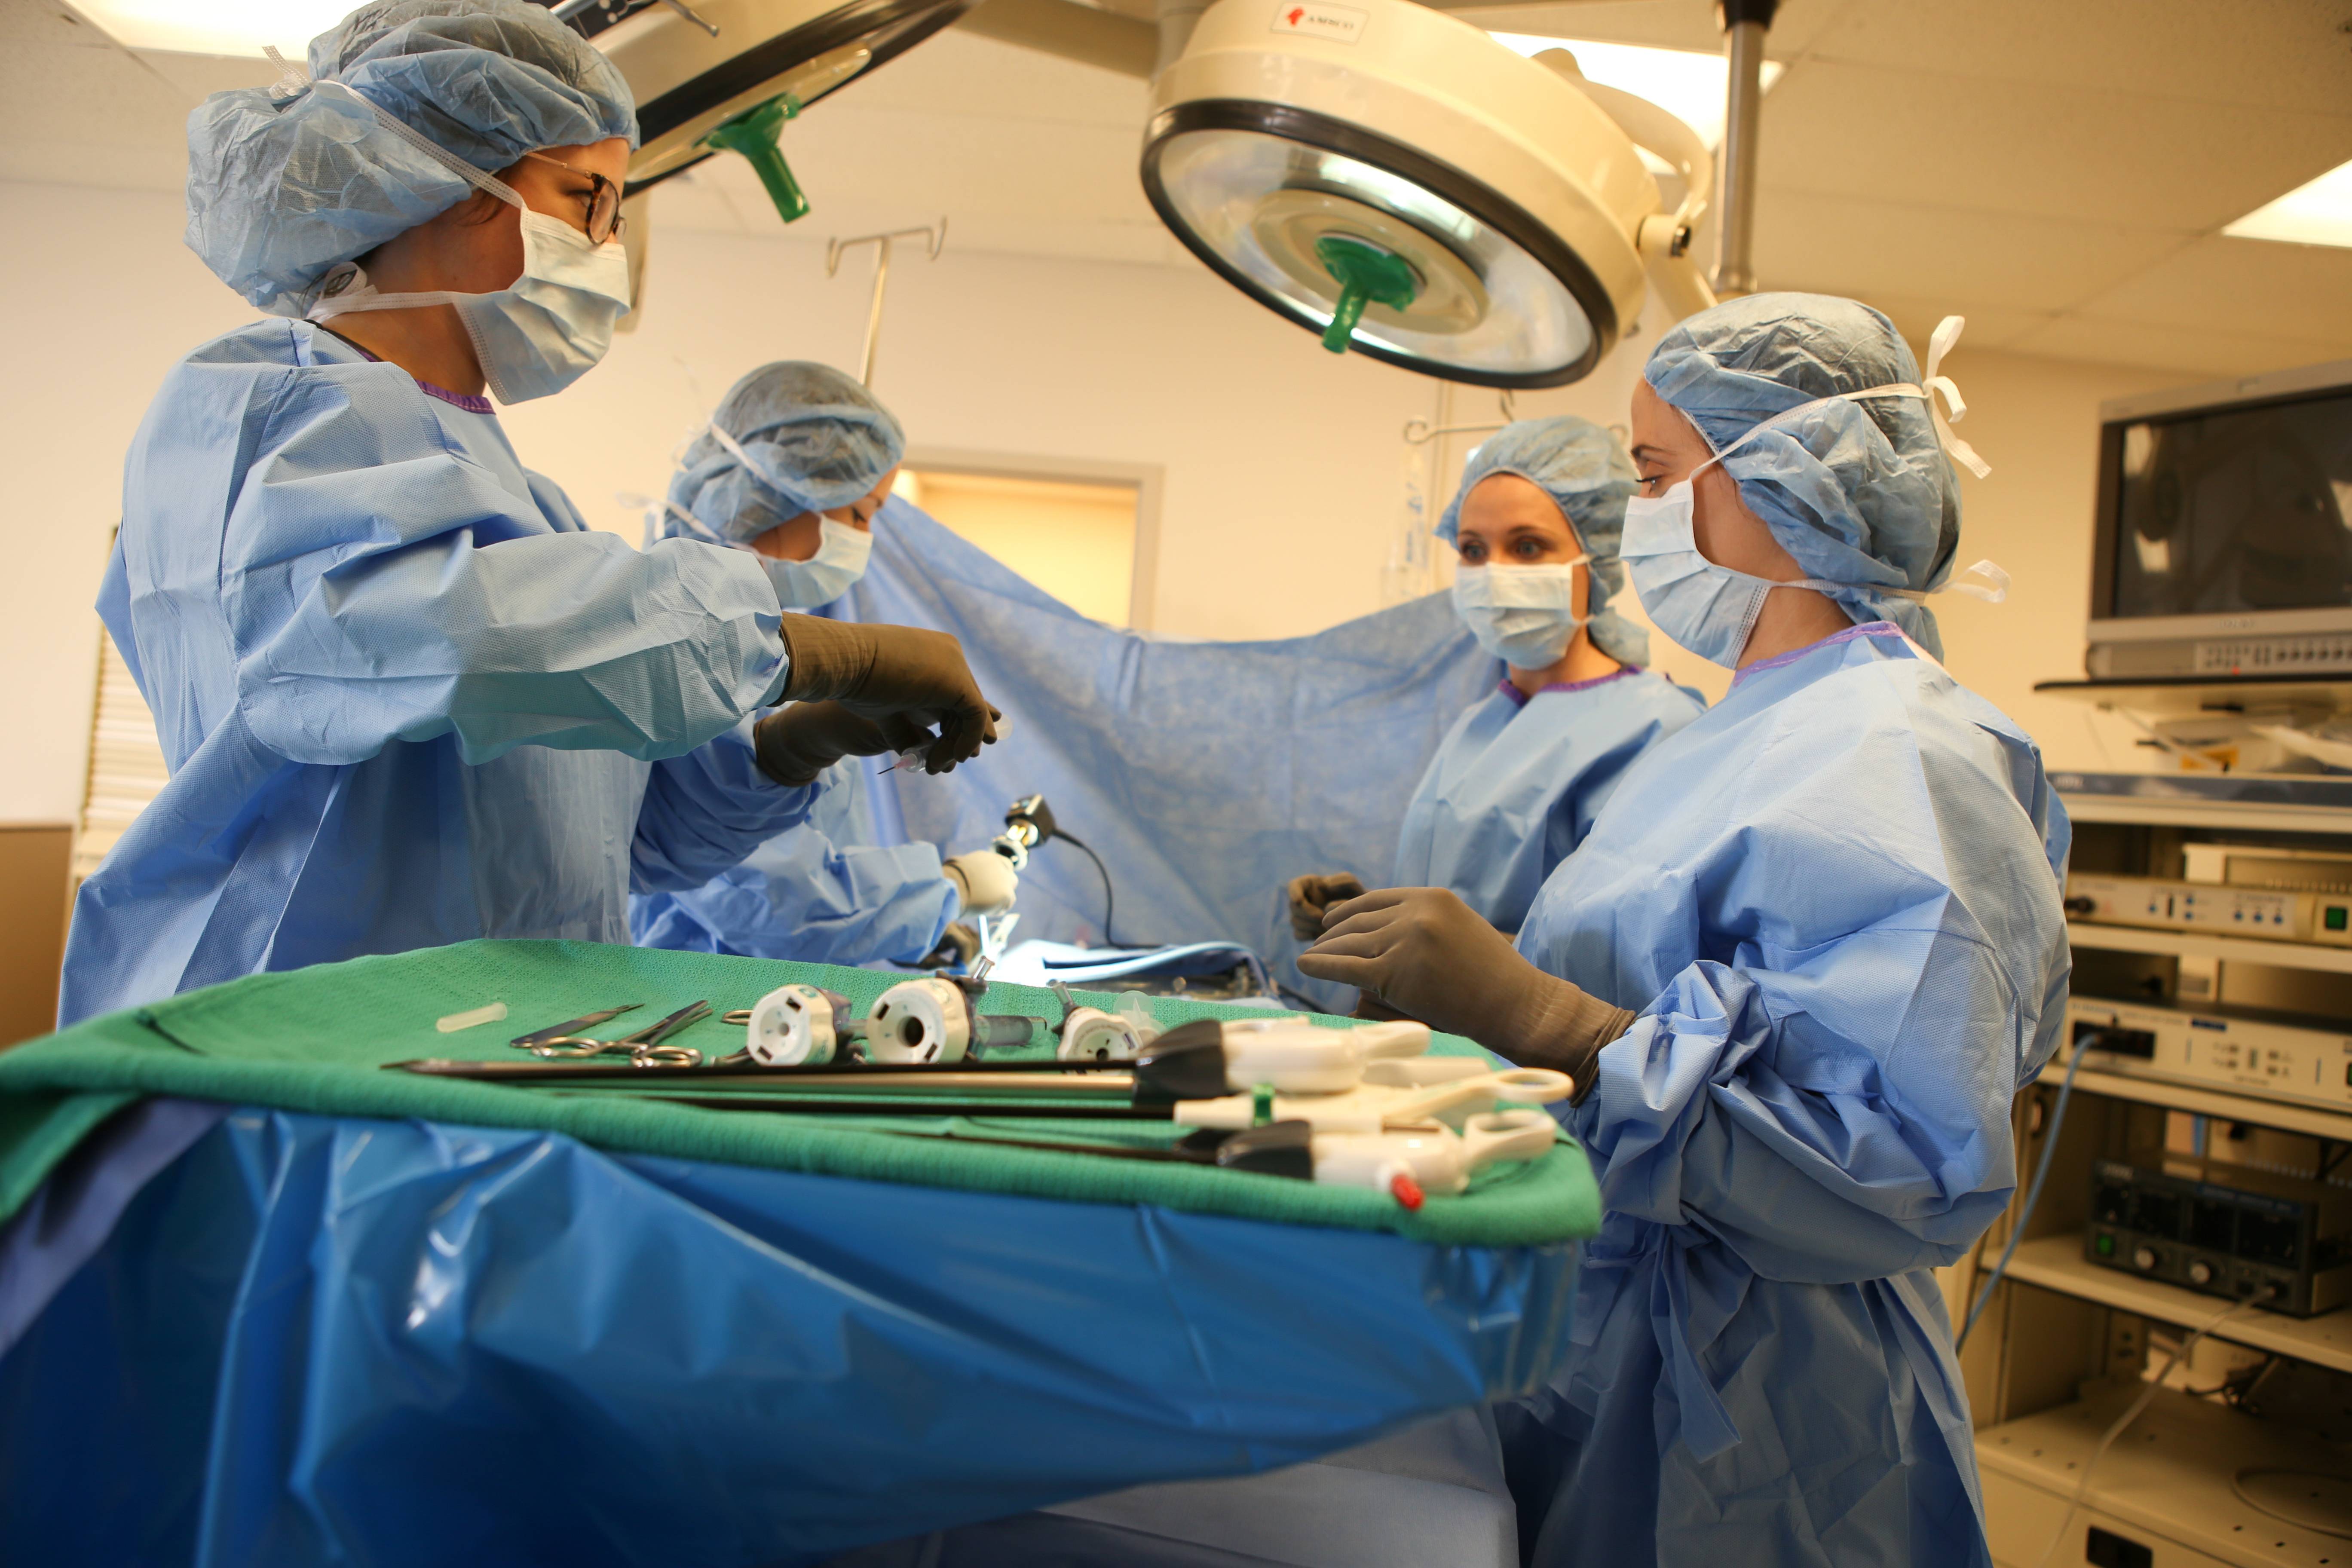 Health career students in a surgical setting